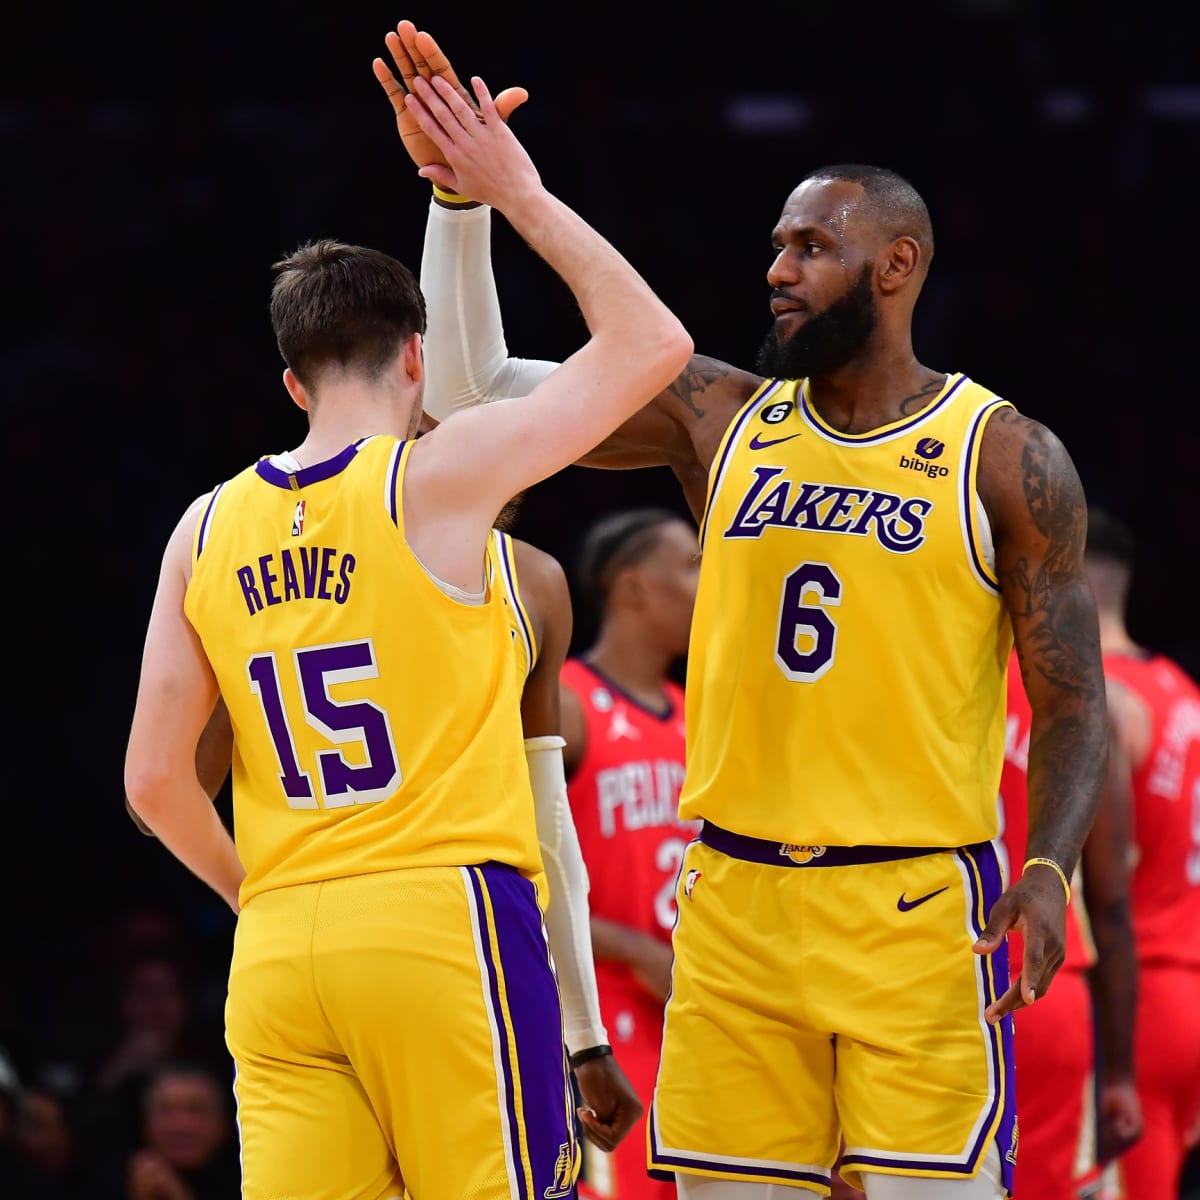 Lakers guard Austin Reaves asks fans for a new nickname, Twitter obliges